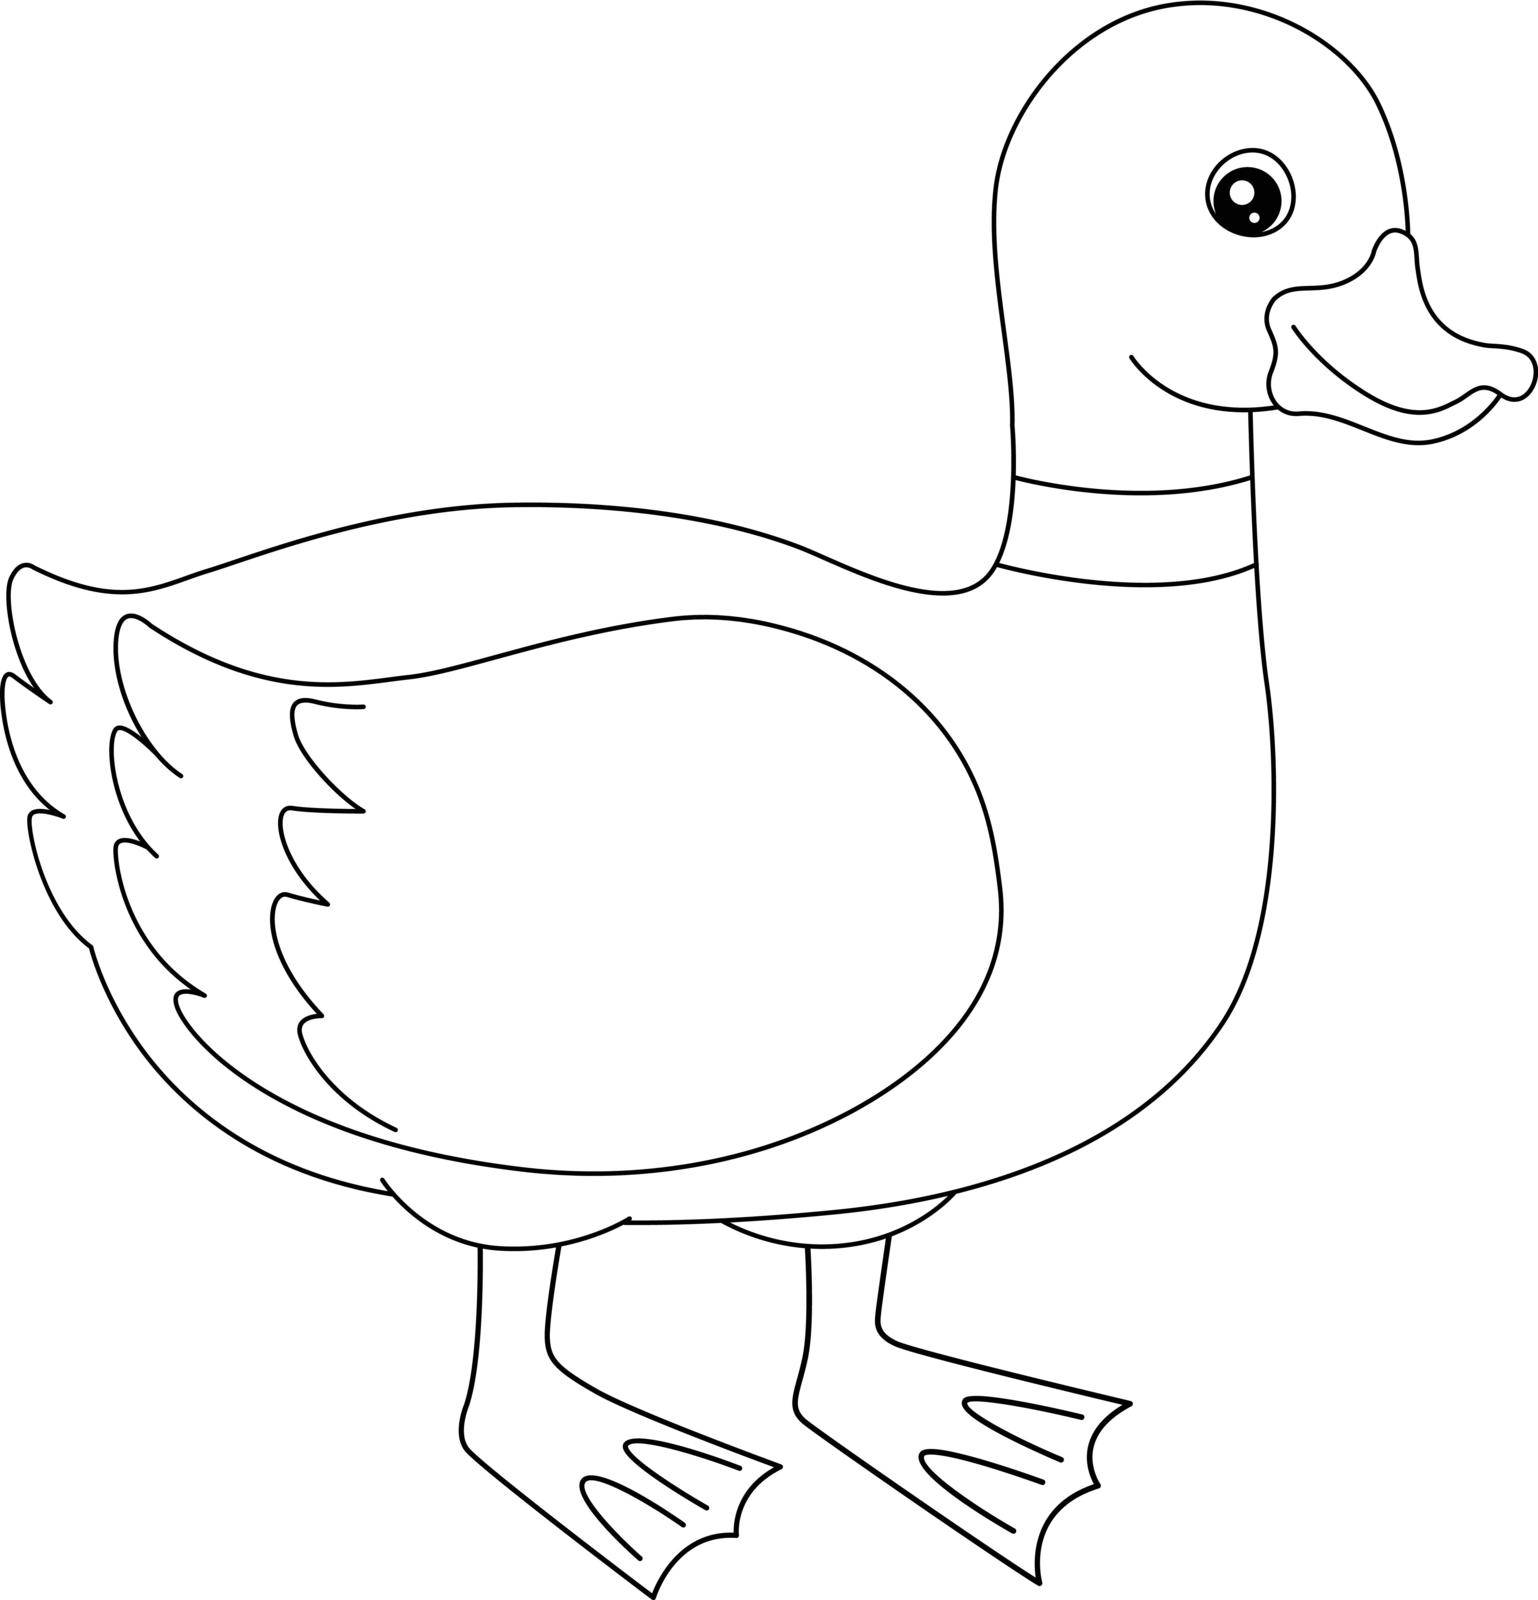 Duck Coloring Page Isolated for Kids by abbydesign